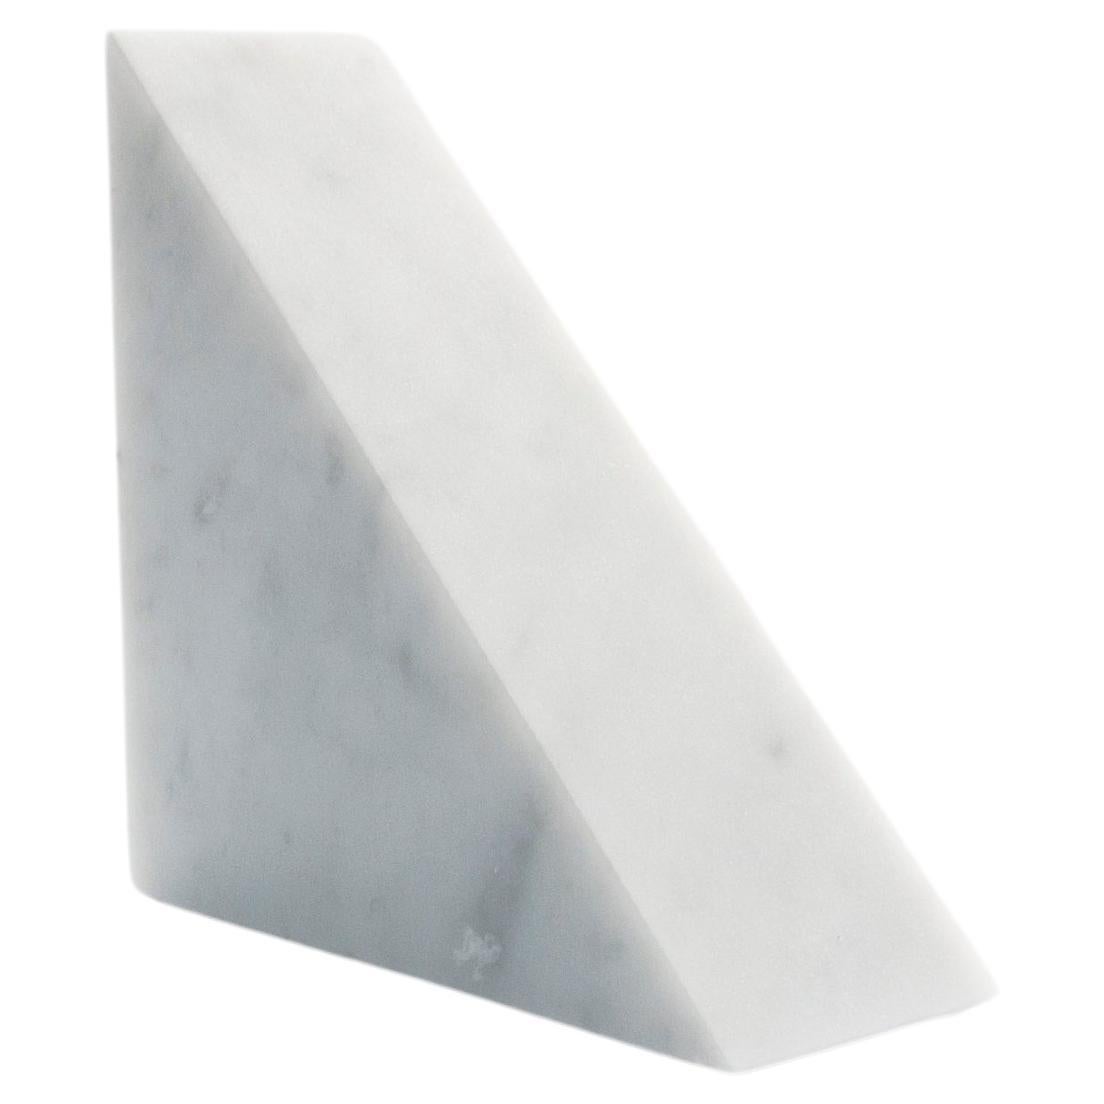 Handmade Big Bookend with Triangular Shape in Satin White Carrara Marble For Sale